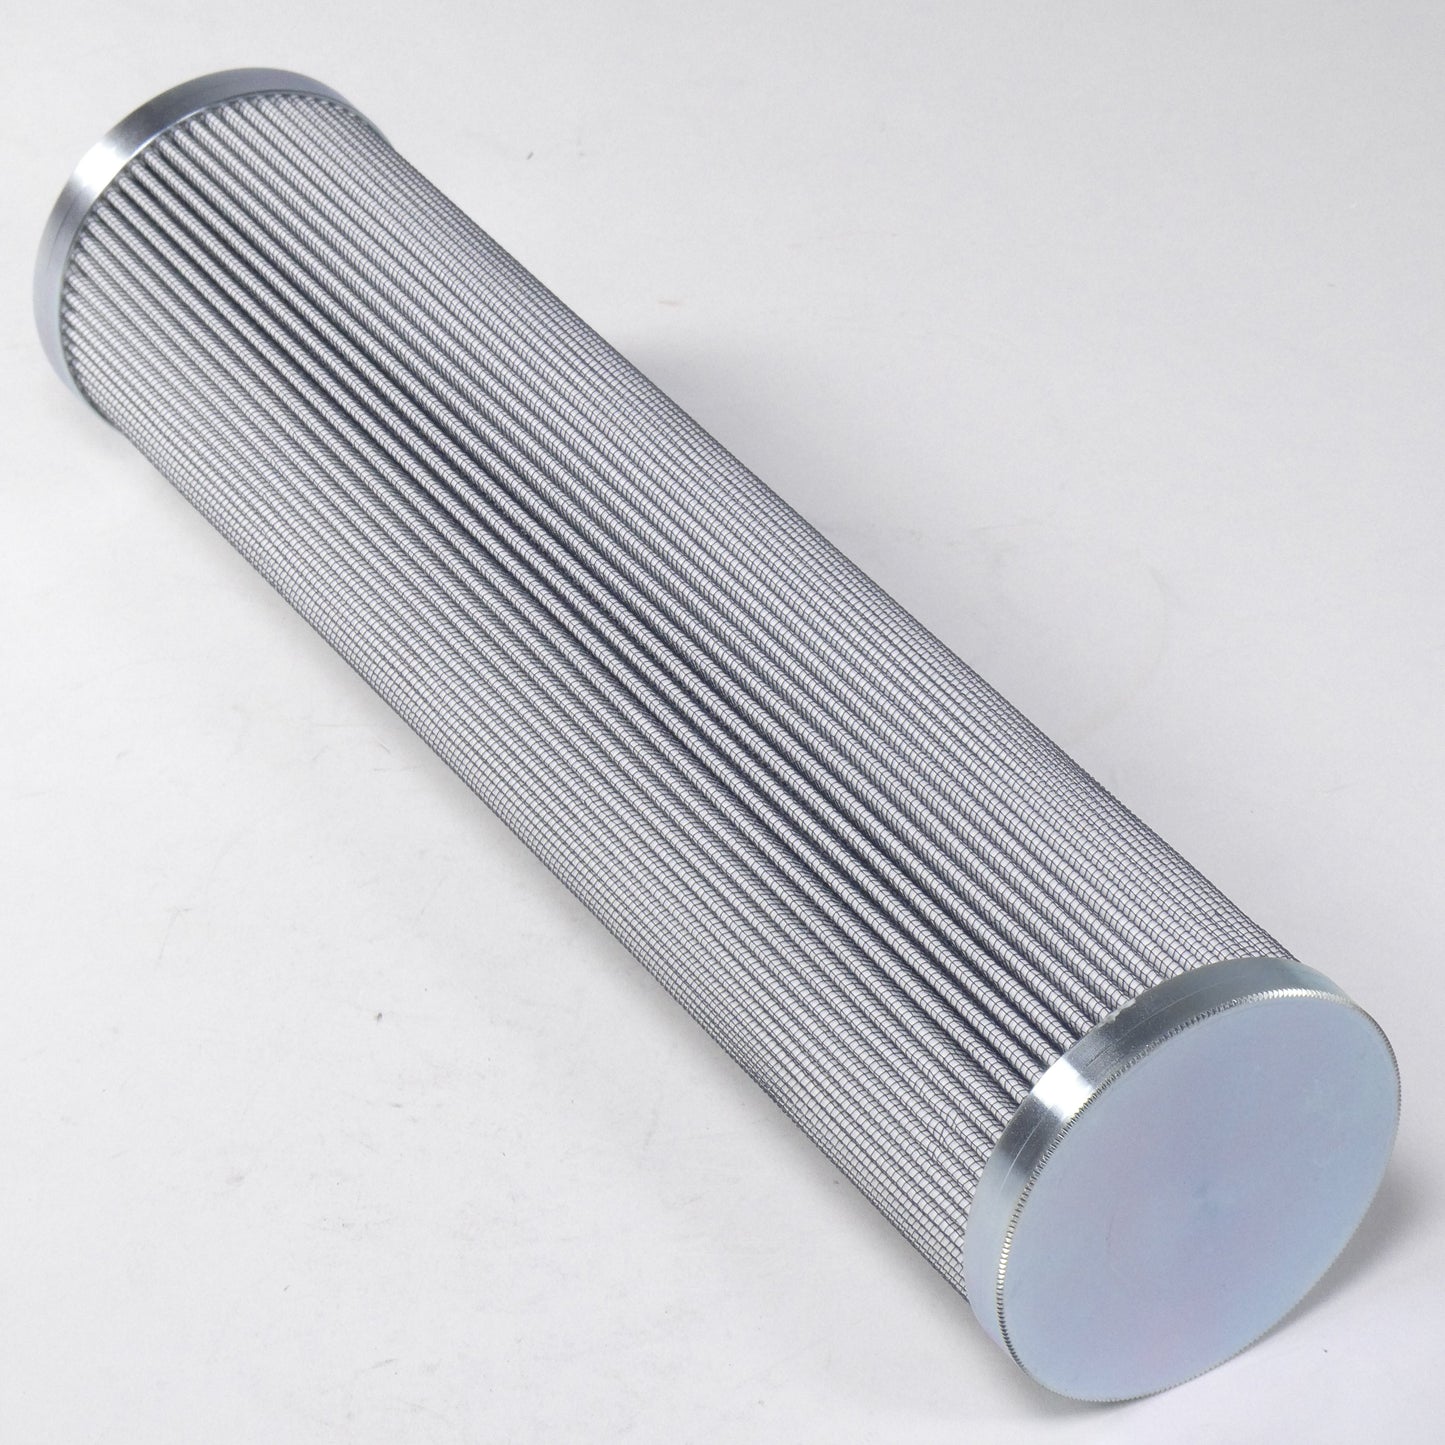 Hydrafil Replacement Filter Element for Internormen 05.9601.3VG.210.E.V.13